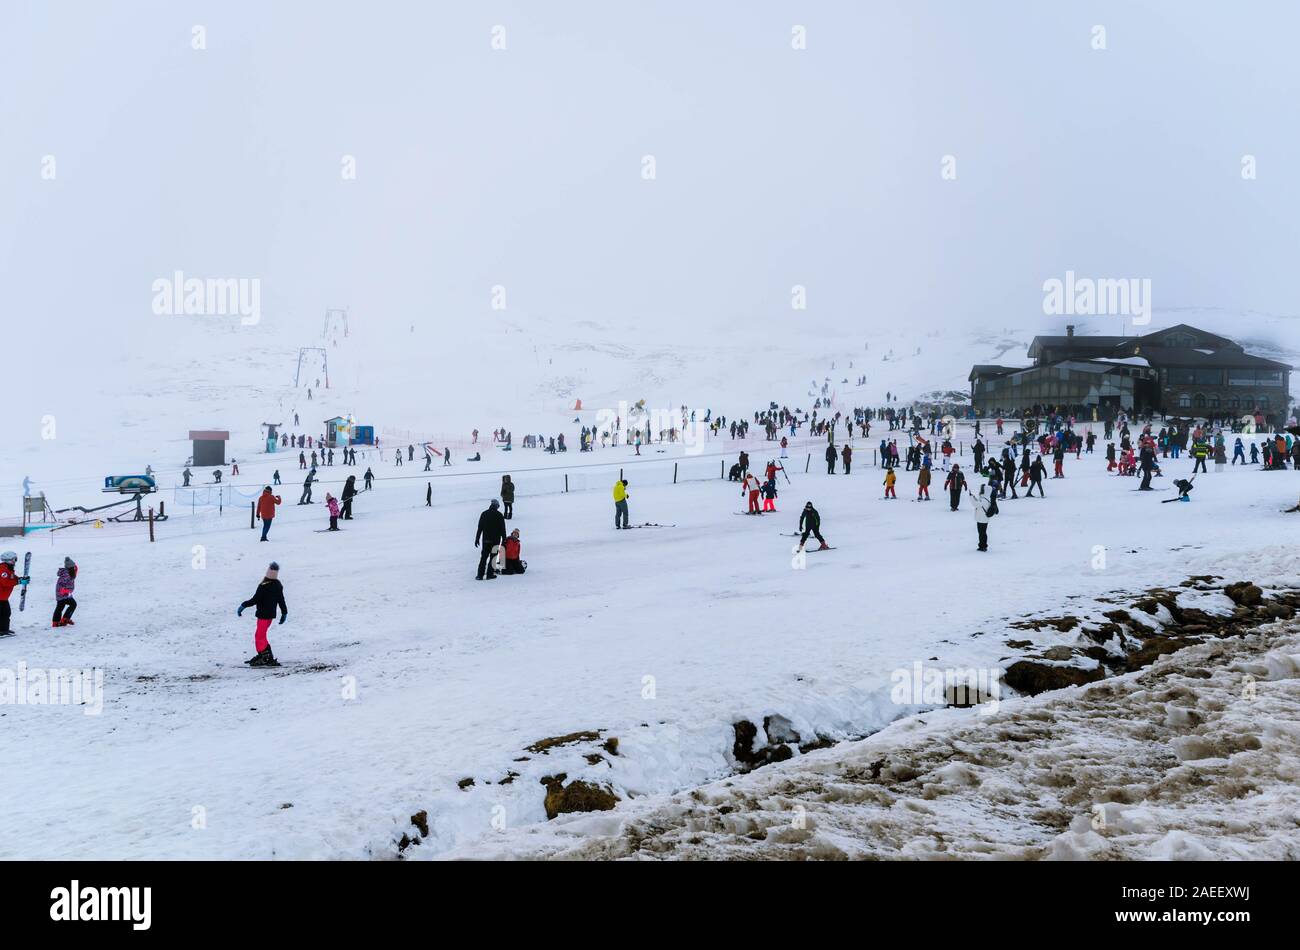 Winter Sport Center High Resolution Stock Photography and Images - Alamy